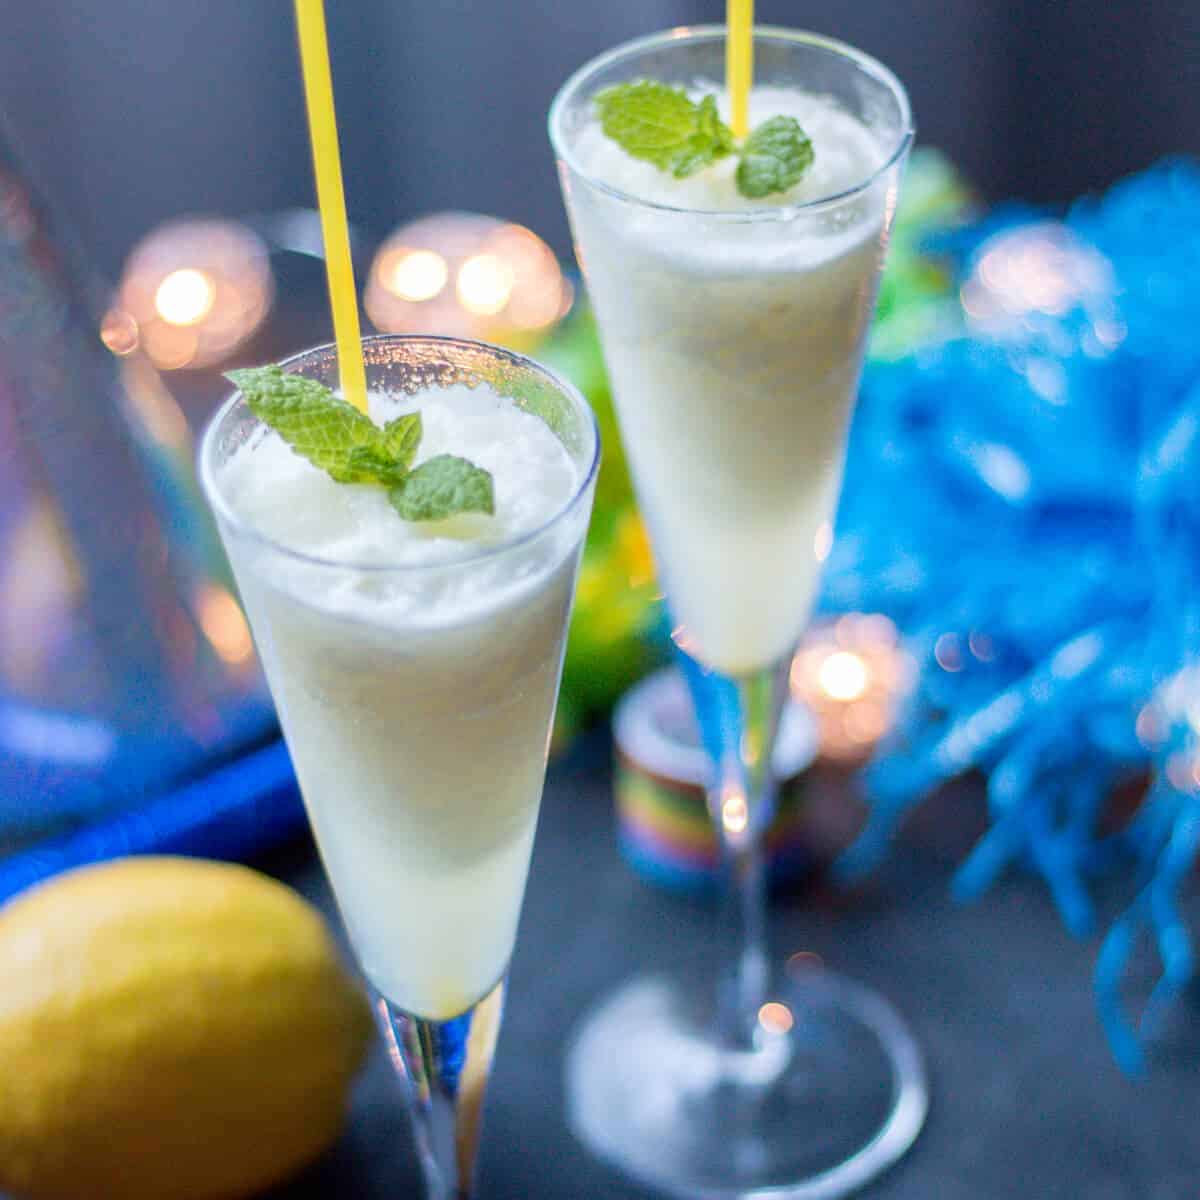 Two champagne glasses filled with a lemon champagne sorbet and garnished with fresh spearmint leaves.